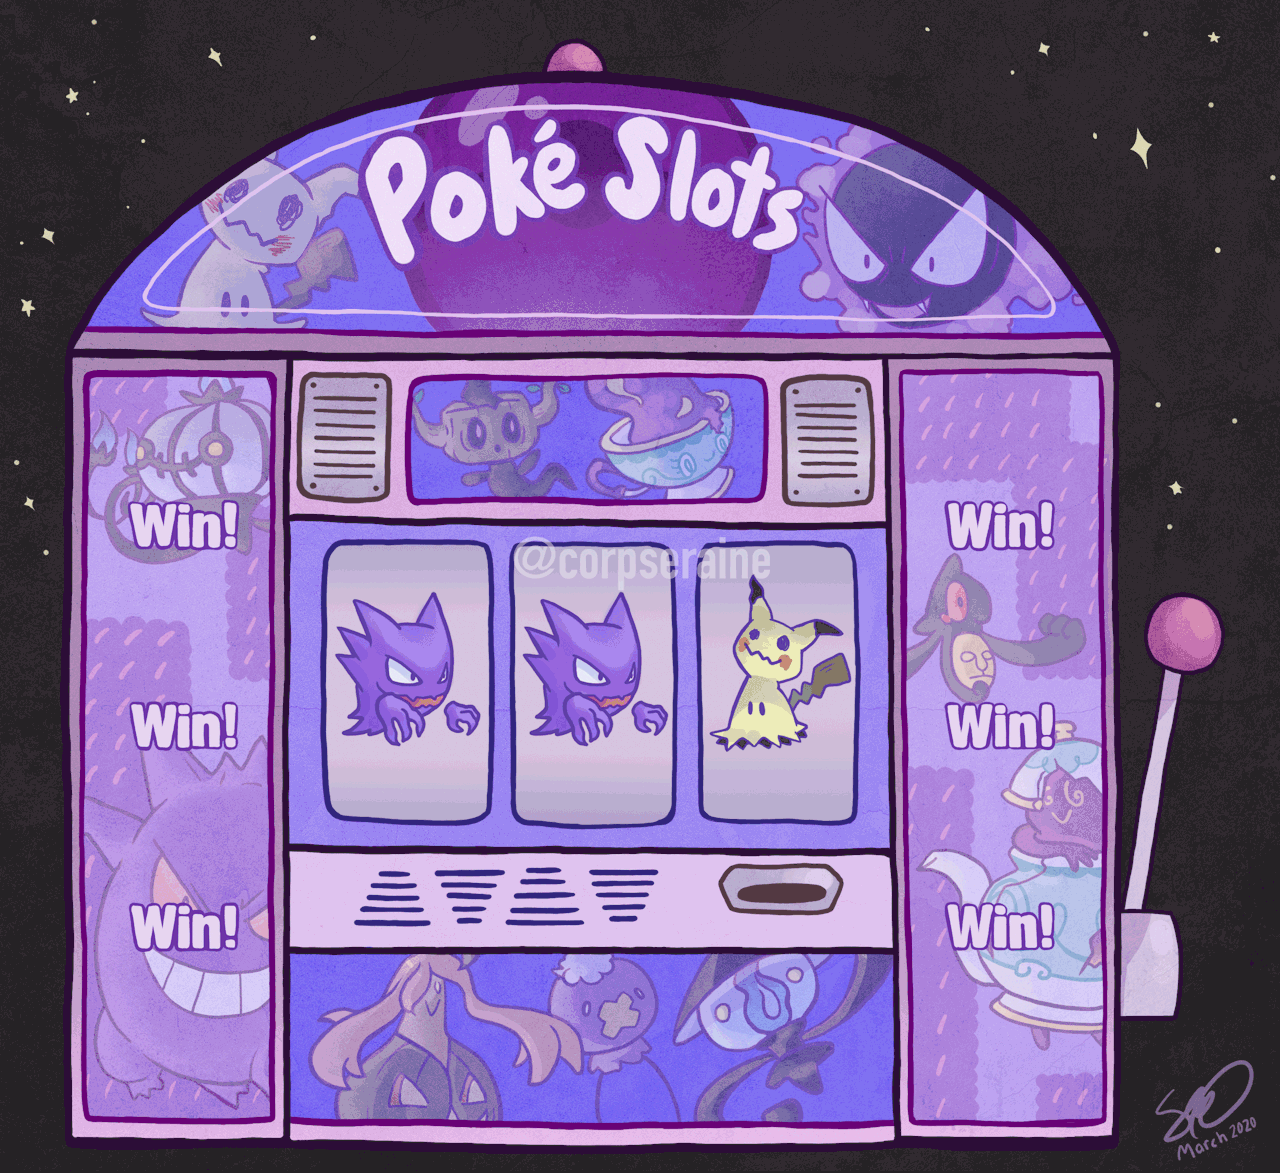 why did slot machines removed pokemon